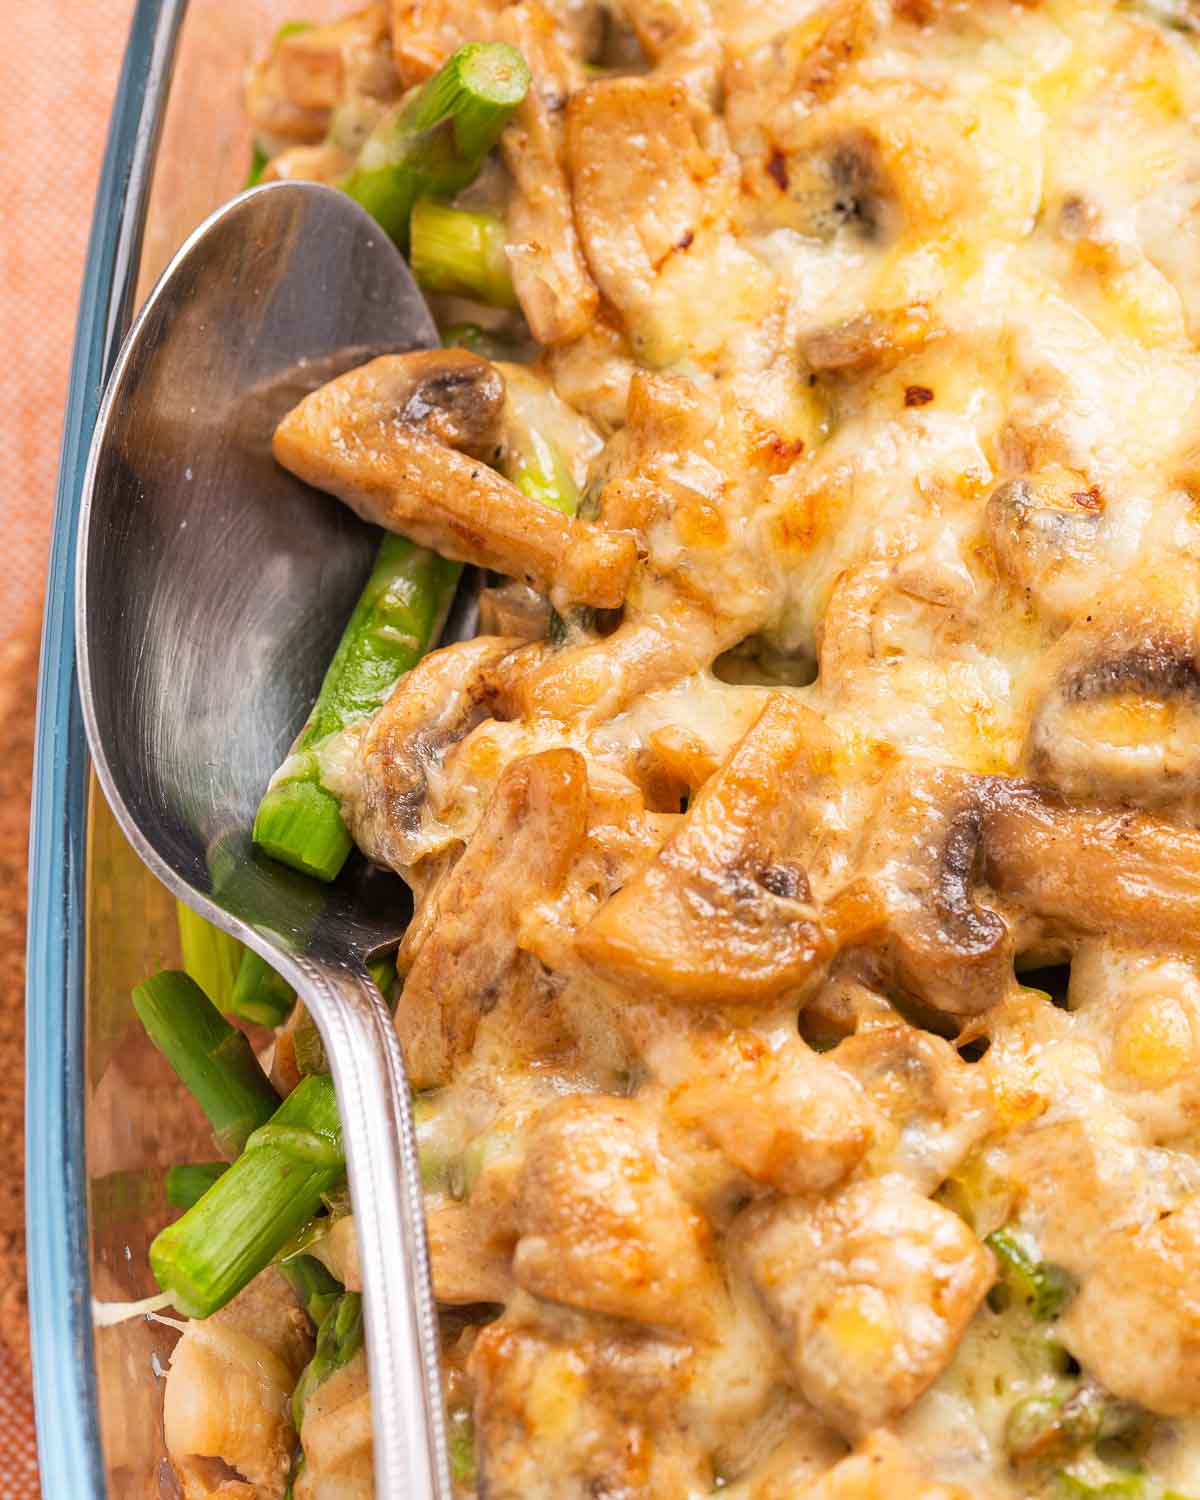 A cheesy casserole with chicken, asparagus, and mushrooms in a creamy sauce.